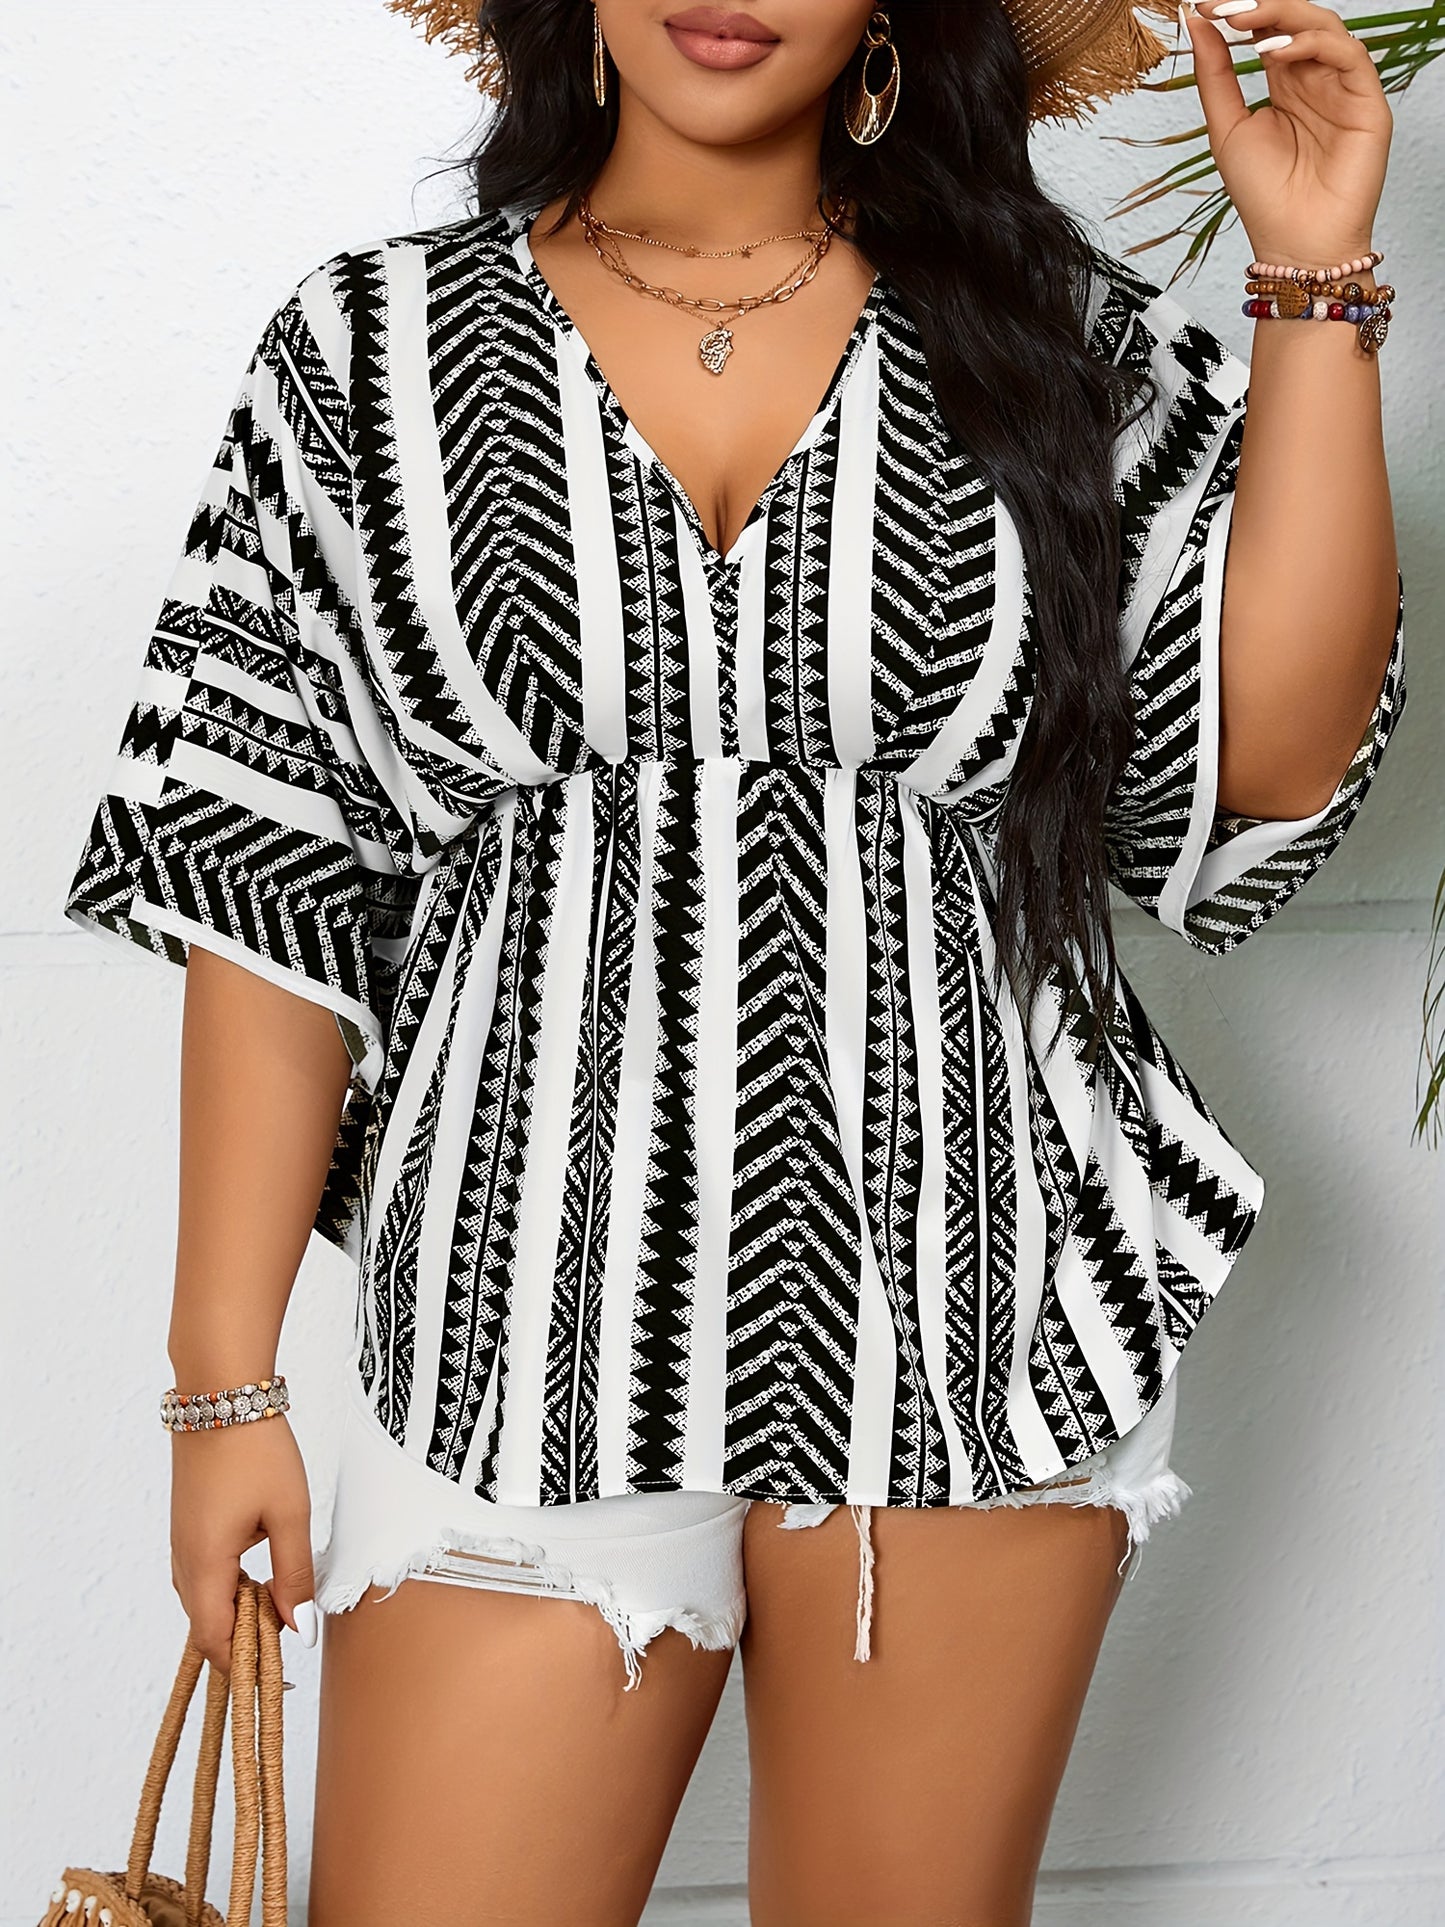 Plus Size Elegant V Neck Shirting Blouse - Chic Geo Print, Cinched Waist, Machine Washable, Non-Stretch Polyester Fabric, Perfect for Spring and Summer - Womens Fashion Clothing